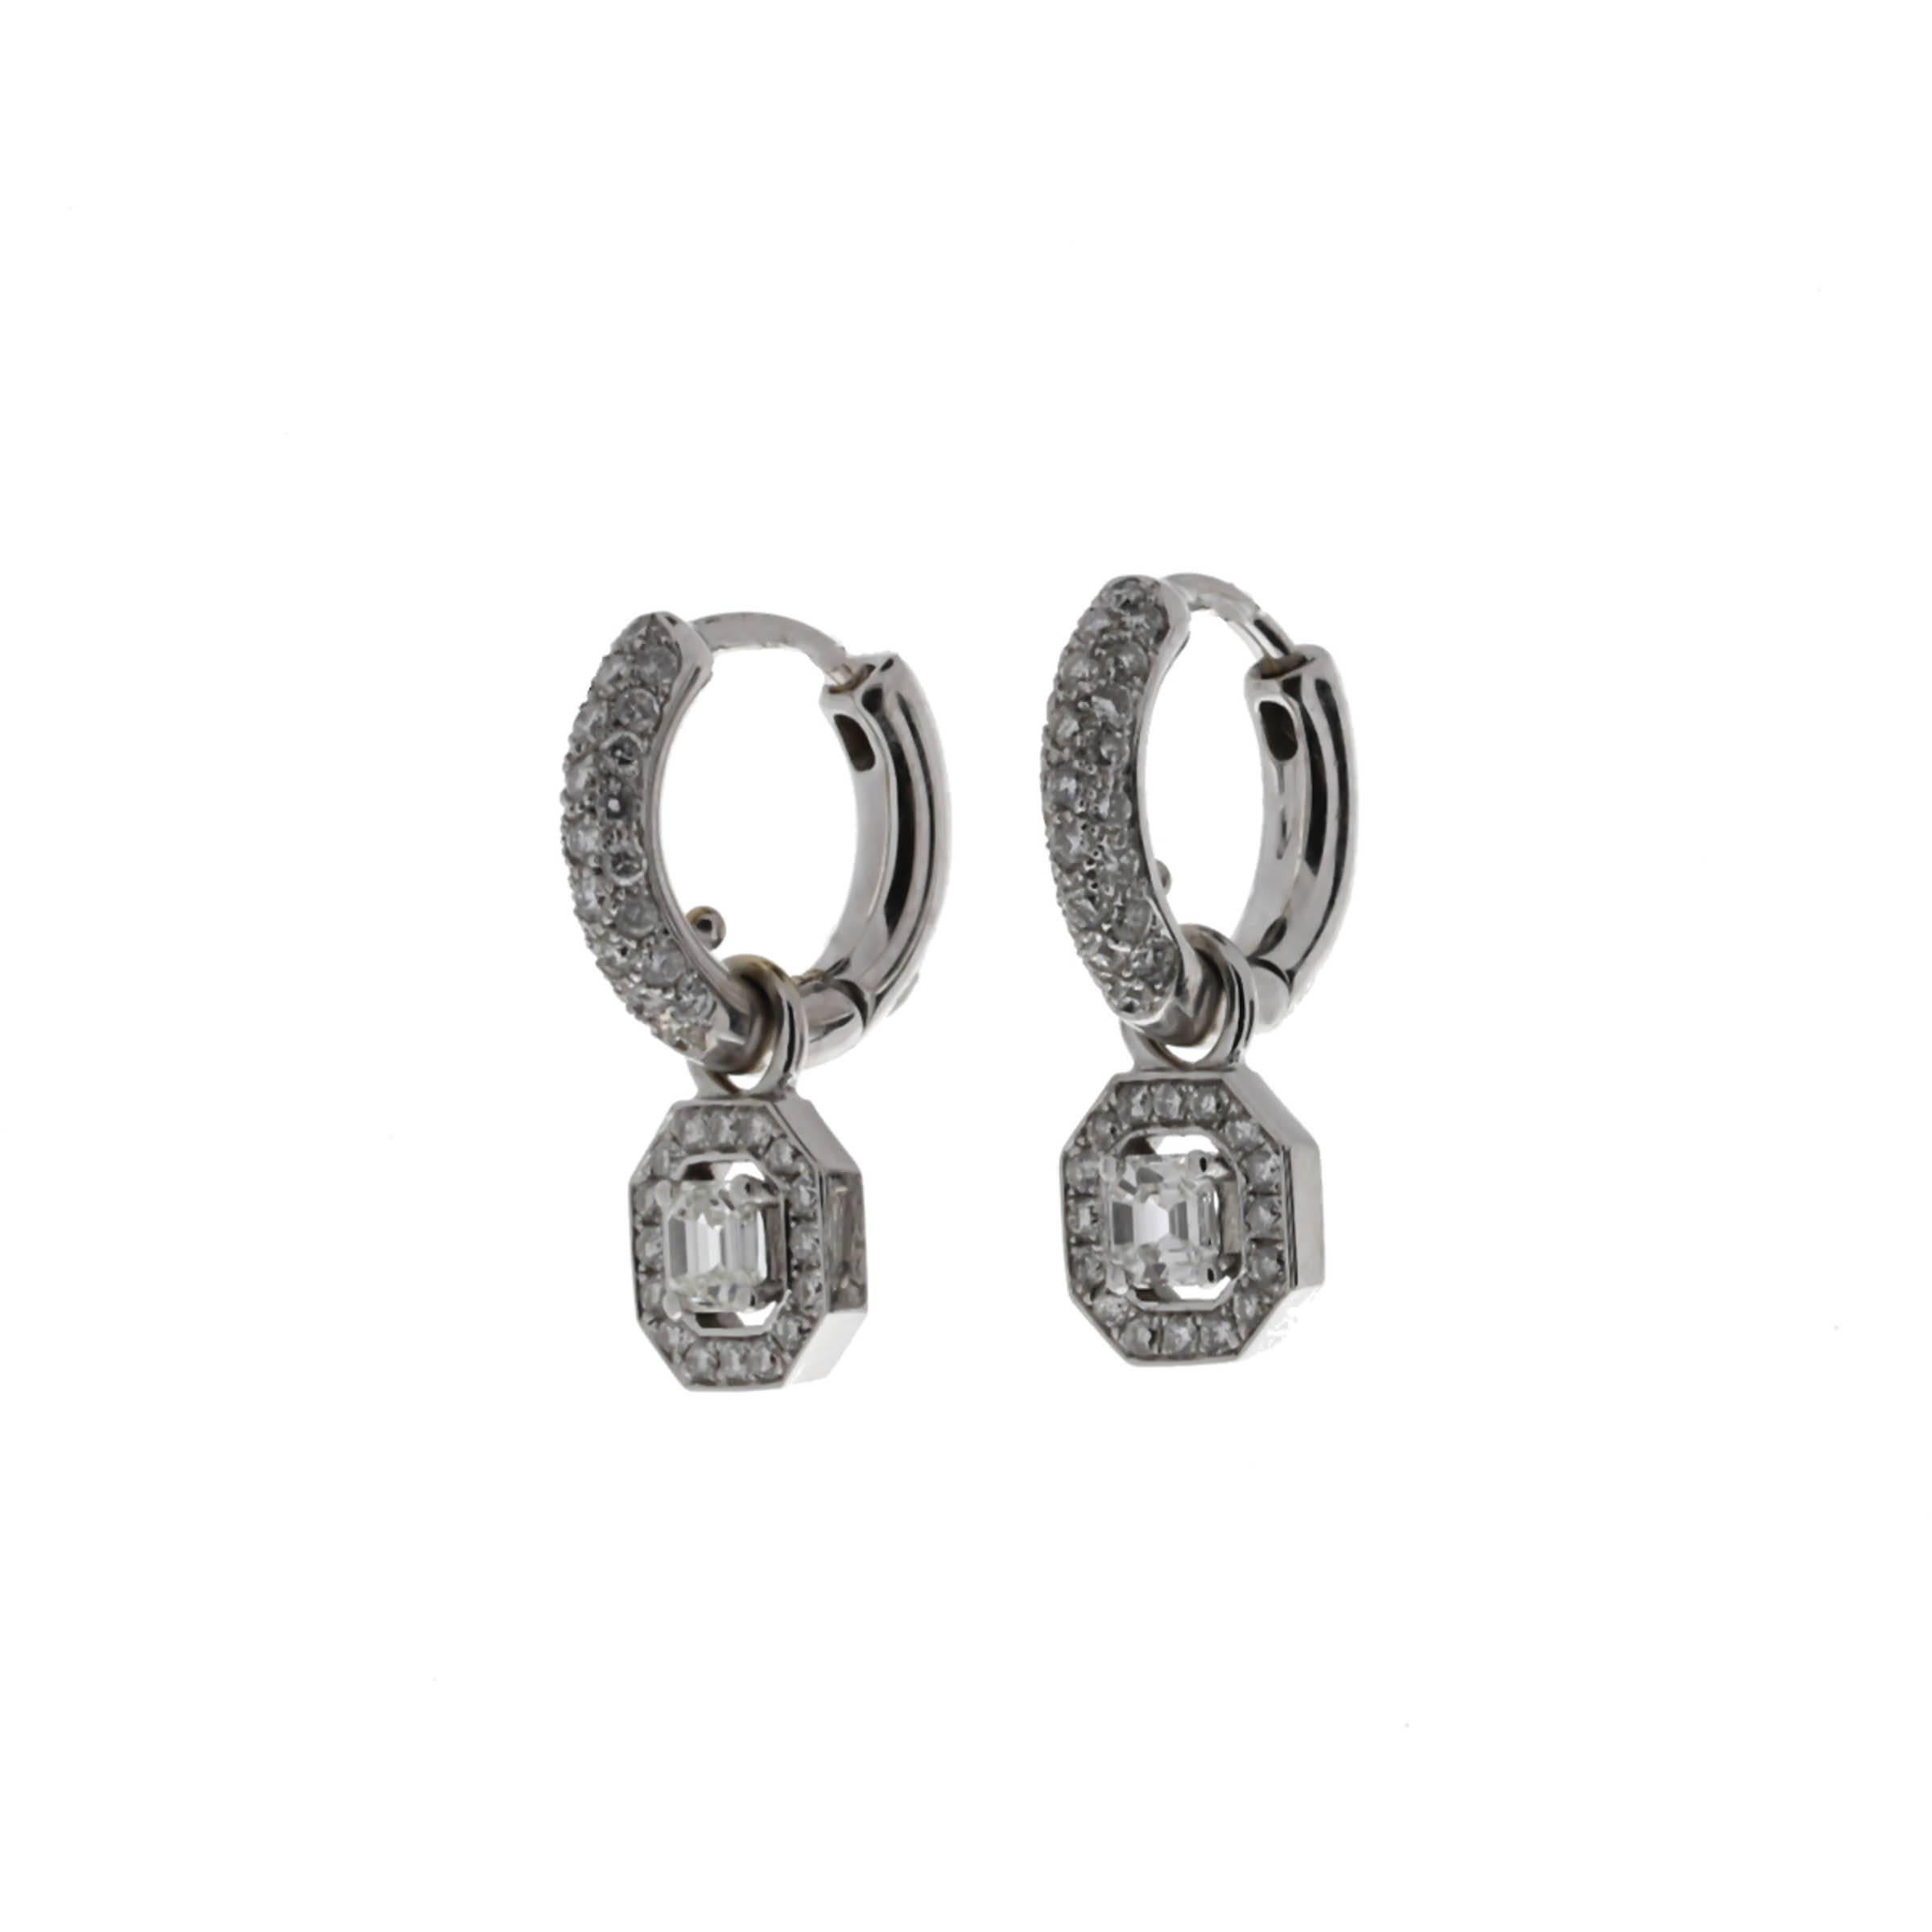 Oliva diamond dangle earrings containing two ascher cut diamonds weighing combined 0.70 carat and 82 pave set round diamonds weighing combined 0.77 carat.